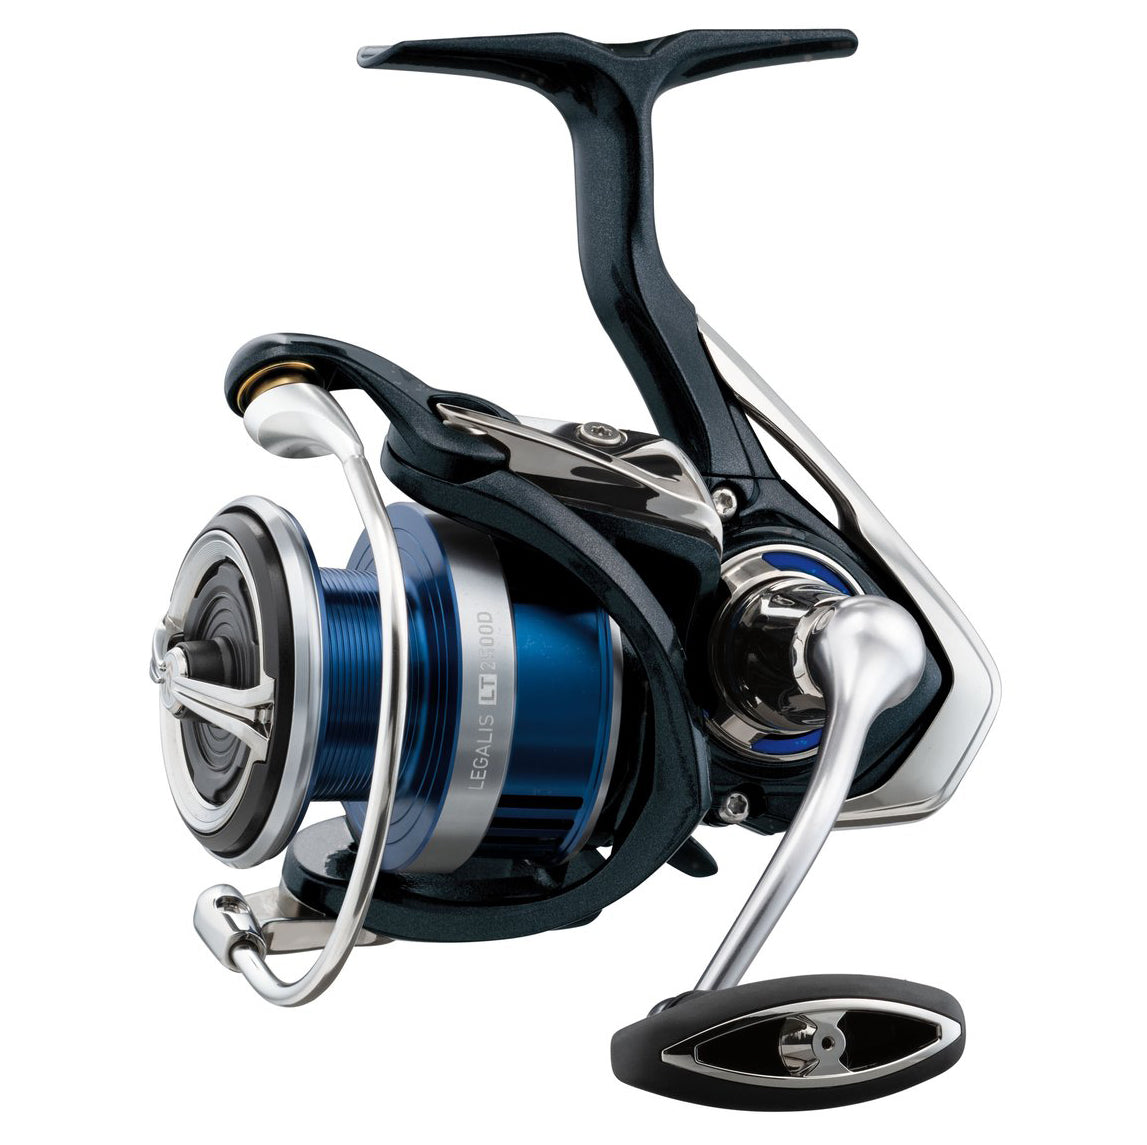 13 Fishing Creed X - Spinning Reel - X3000 - BRAND NEW SEALED!!!